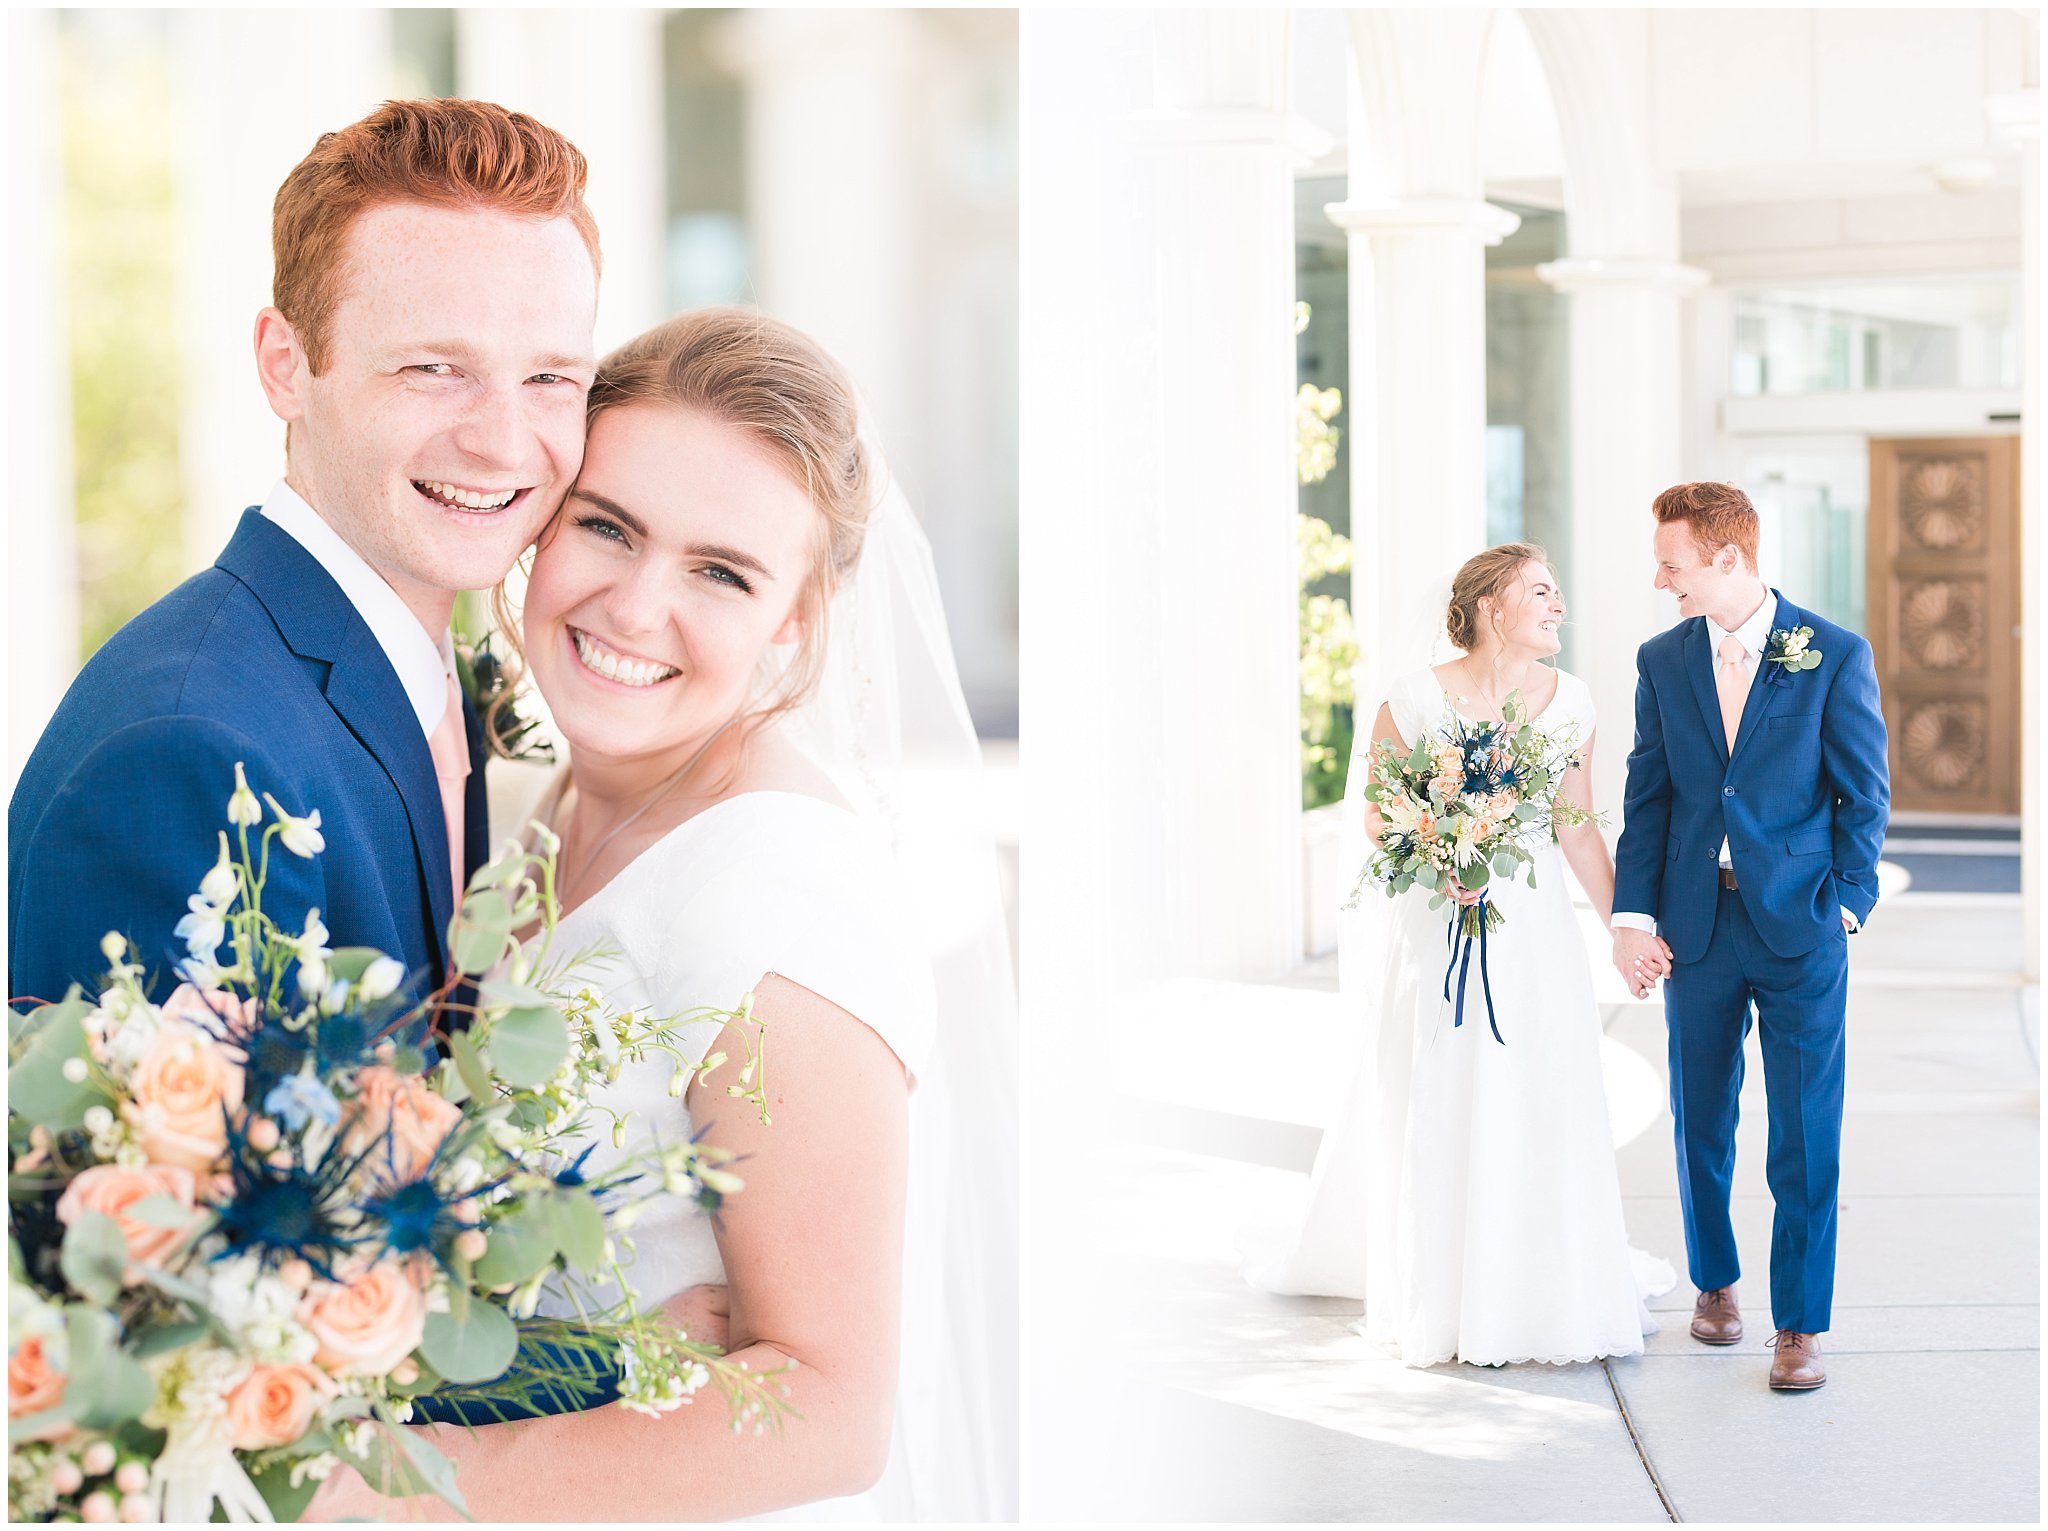 Bride and Groom portraits on wedding day | Bride wearing simple, elegant dress and veil with blue thistle bouquet and groom wearing blue suit and blush tie | Bountiful Temple Wedding and Oak Hills Reception | Jessie and Dallin Photography